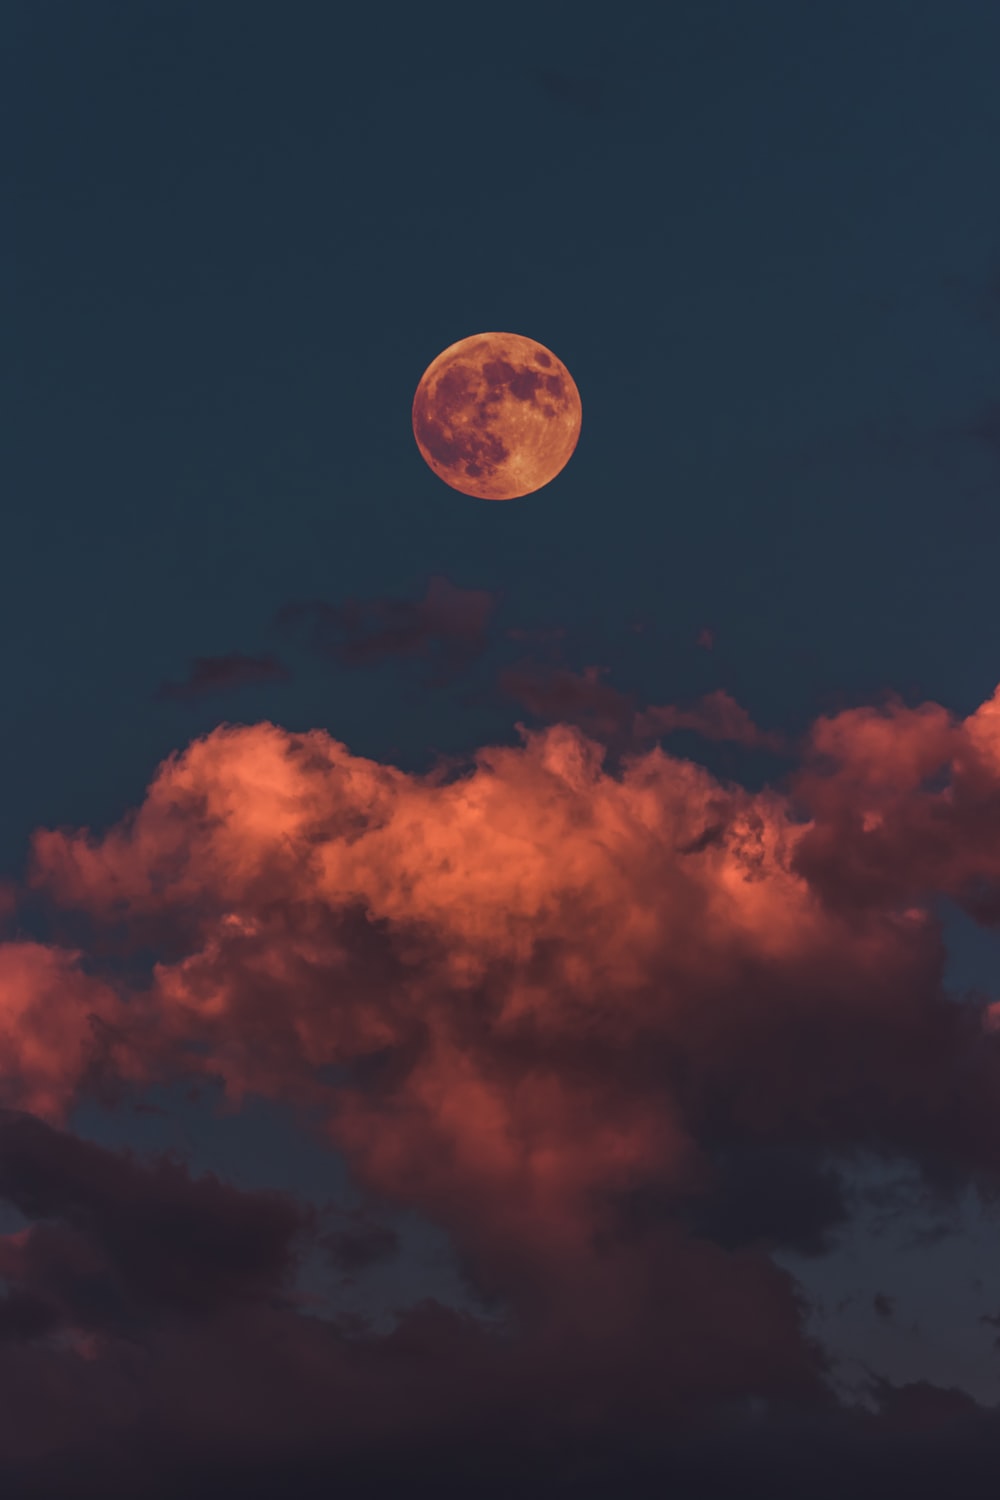 Night Sky Moon Picture. Download Free Image